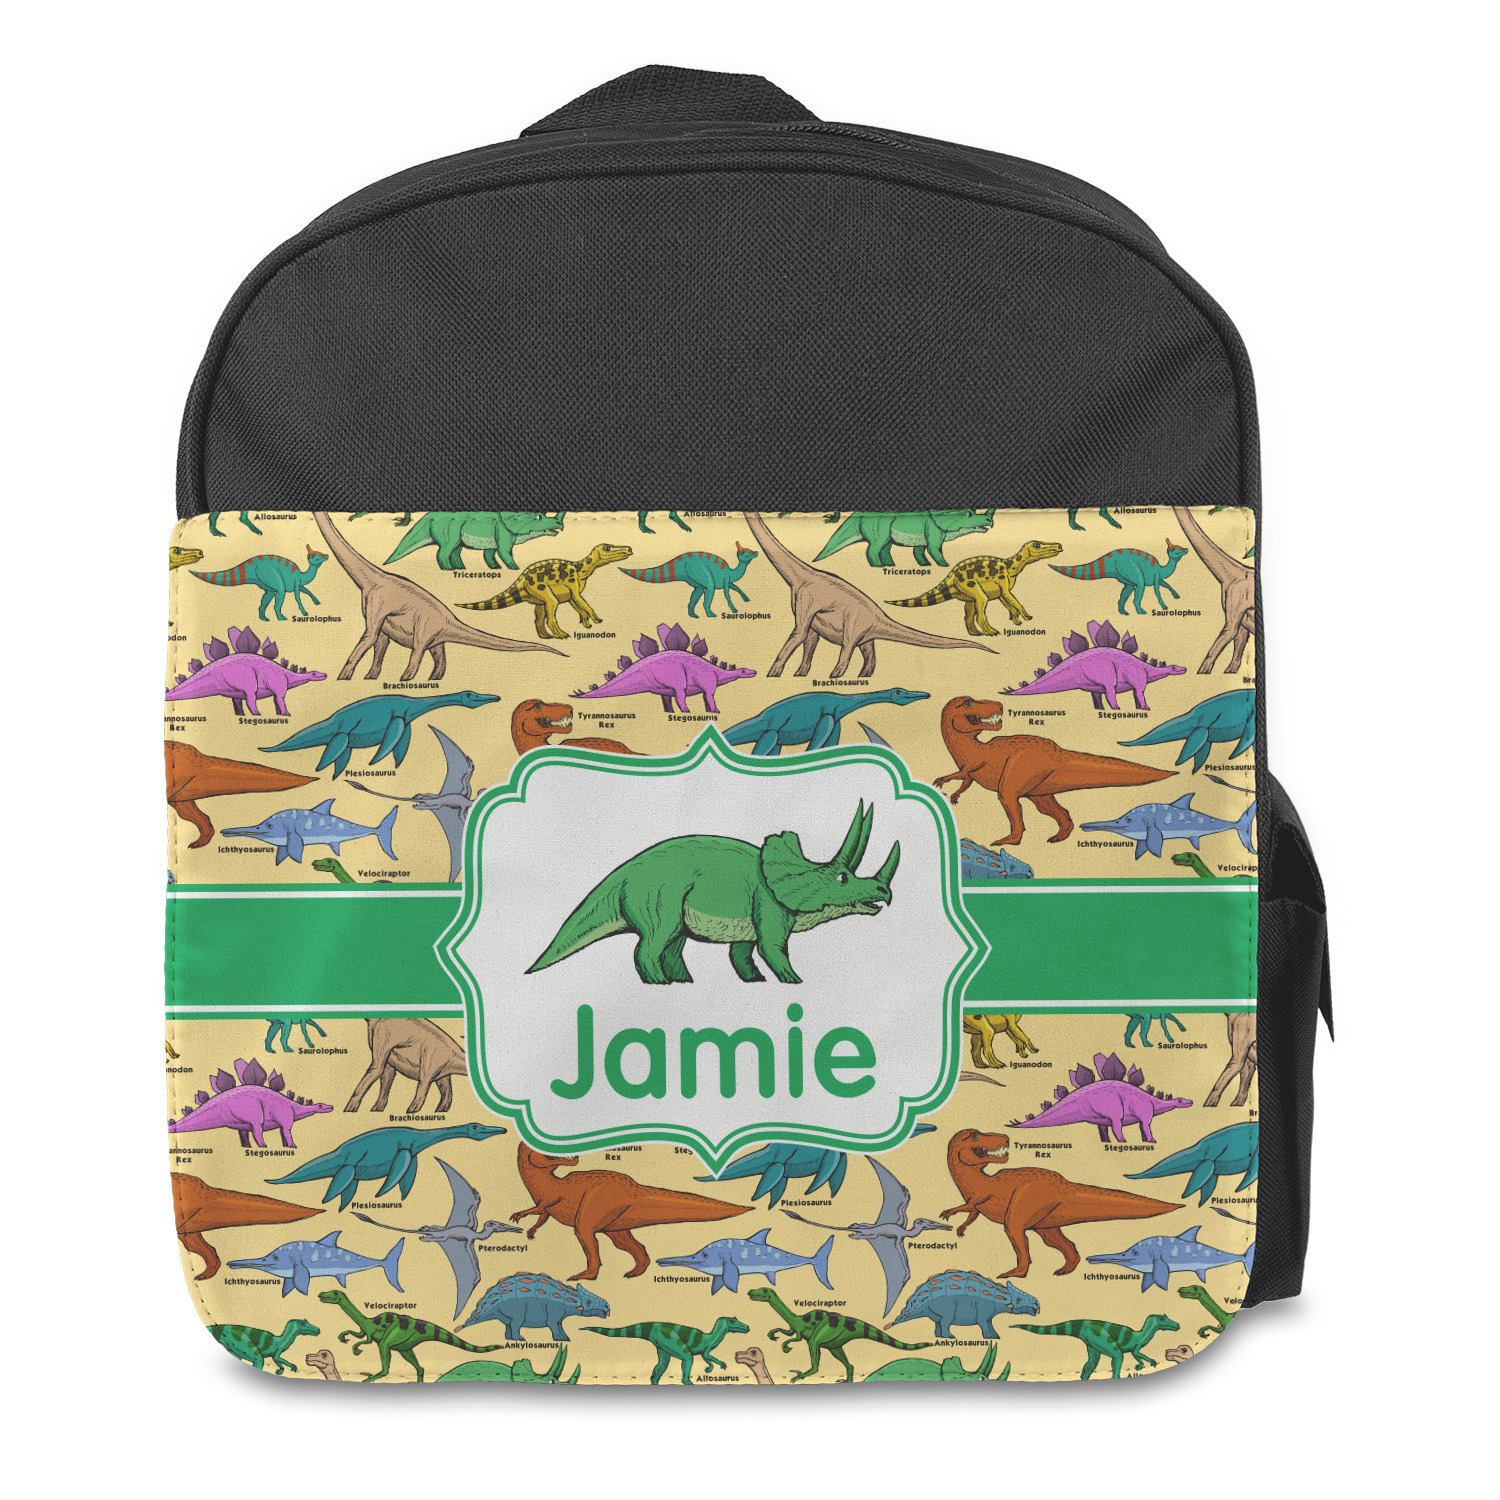 https://www.youcustomizeit.com/common/MAKE/342002/Dinosaurs-Kids-Backpack-Front.jpg?lm=1643818810